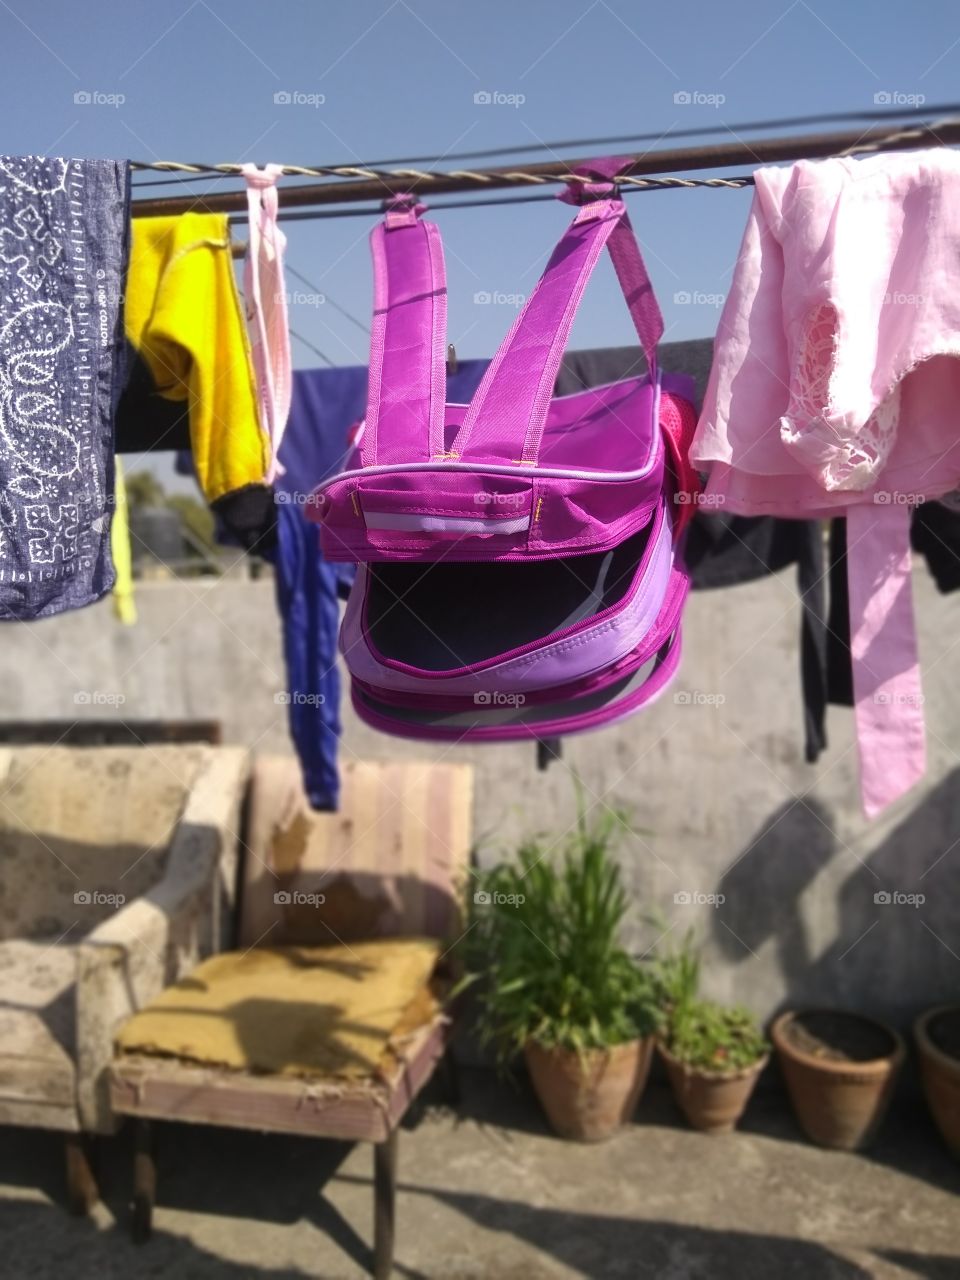 Clothes hung outside for dry